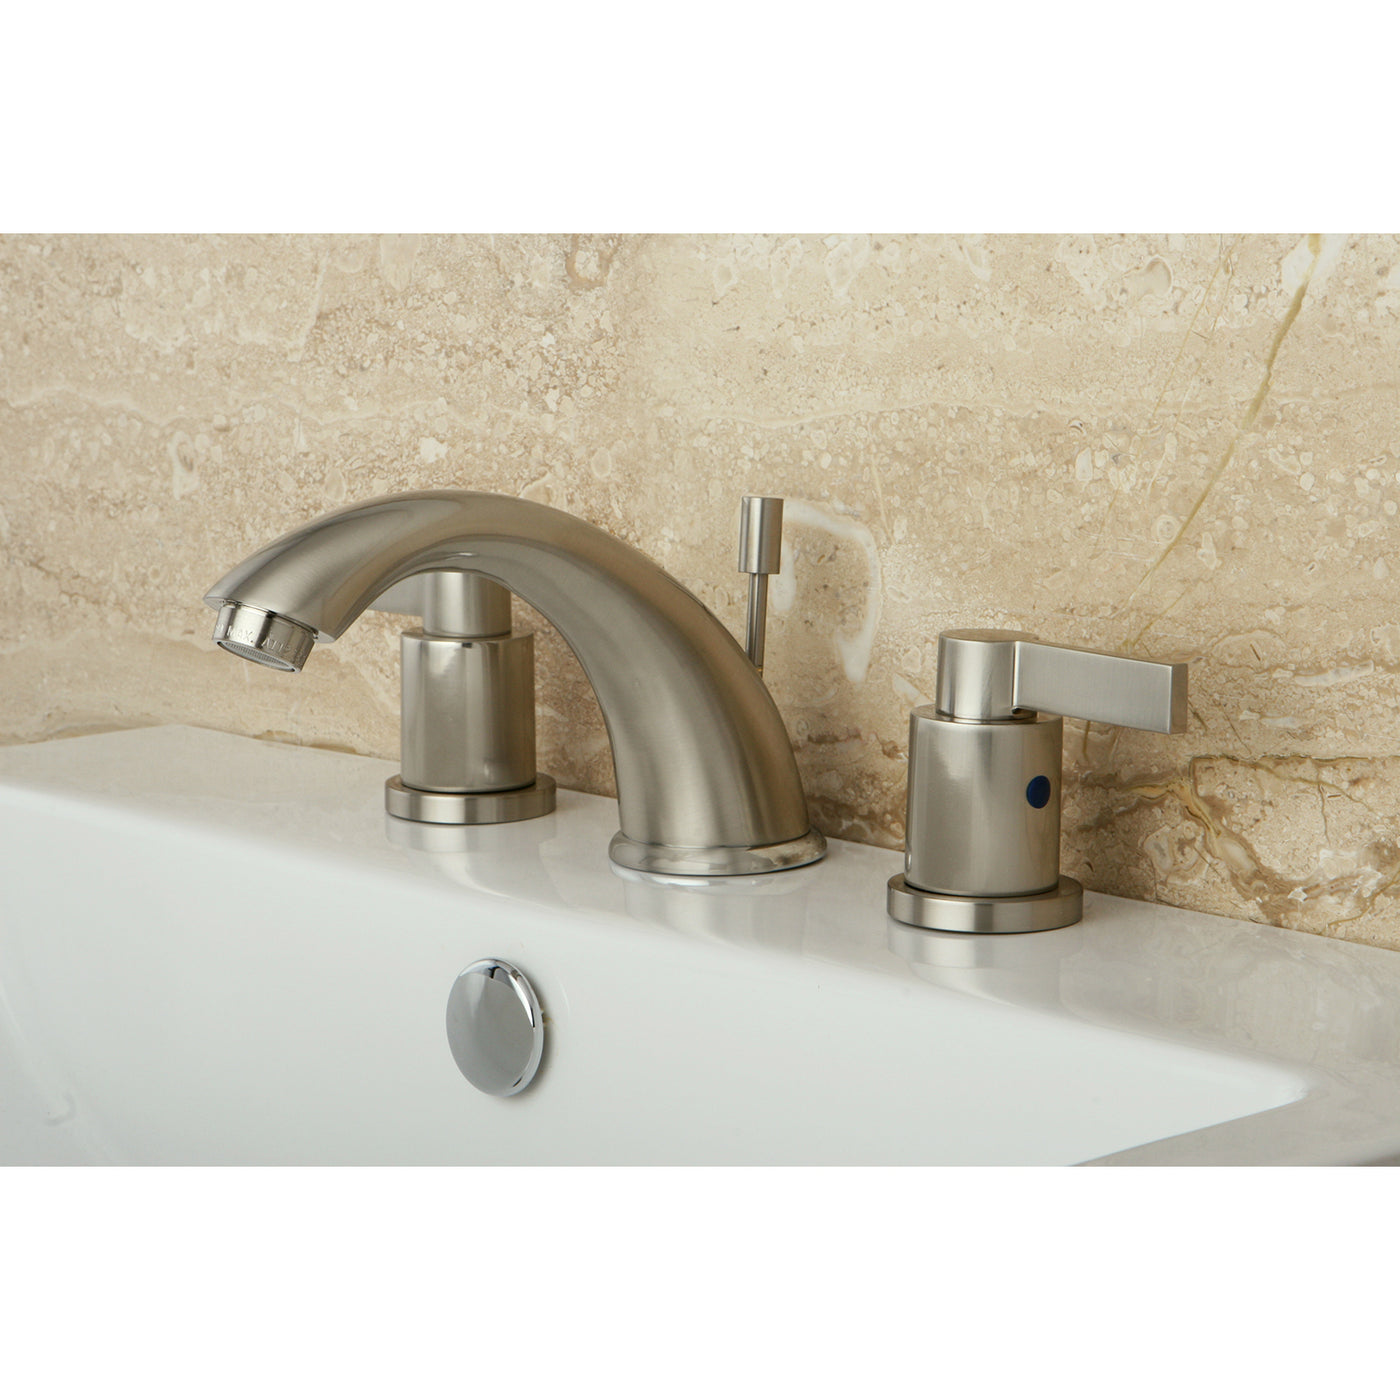 Elements of Design EB8968NDL Widespread Bathroom Faucet with Retail Pop-Up, Brushed Nickel